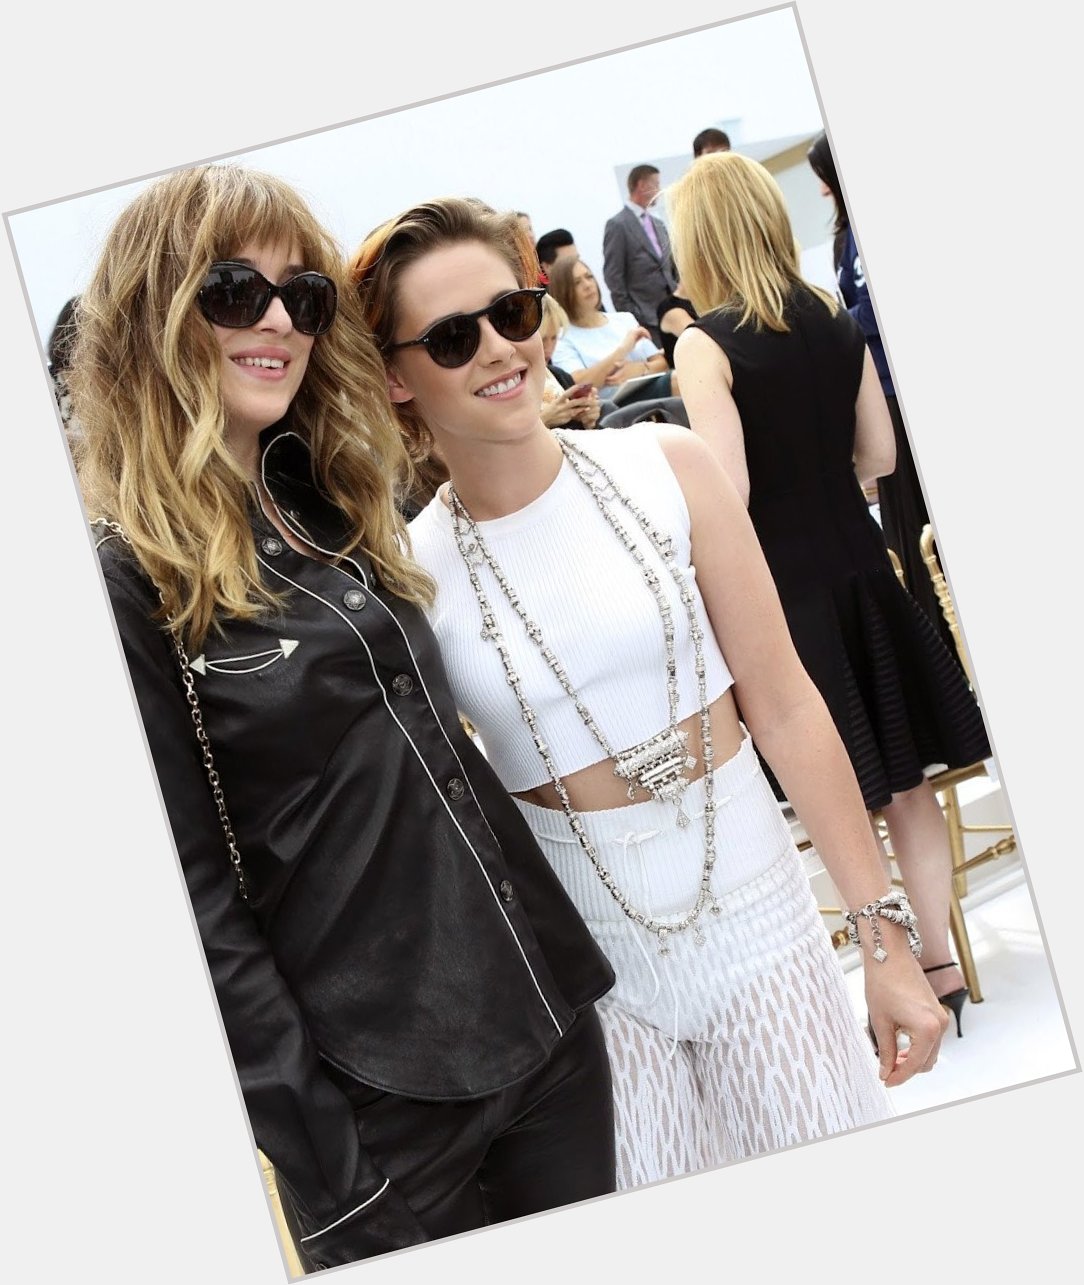 And happy birthday to dakota johnson  (when are we getting new pics of these two together??  ) 